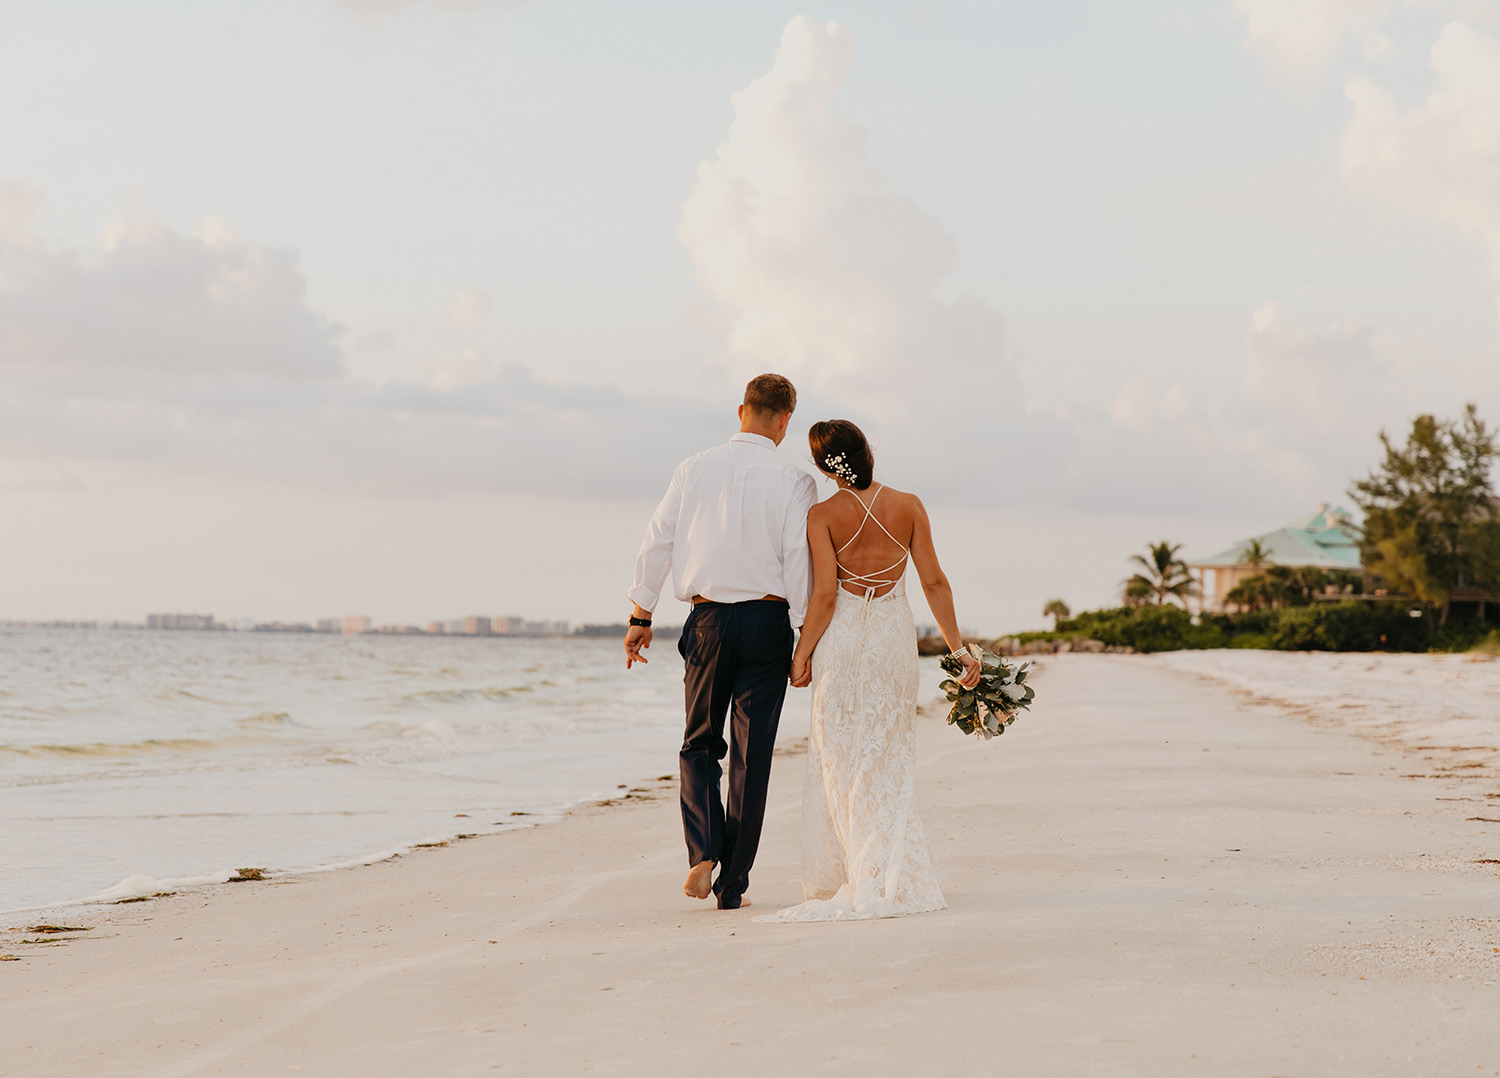 back view of a man in a white button up and black slacks and woman wearing a strappy back sheath wedding dress walking along a beach midday while holding hands